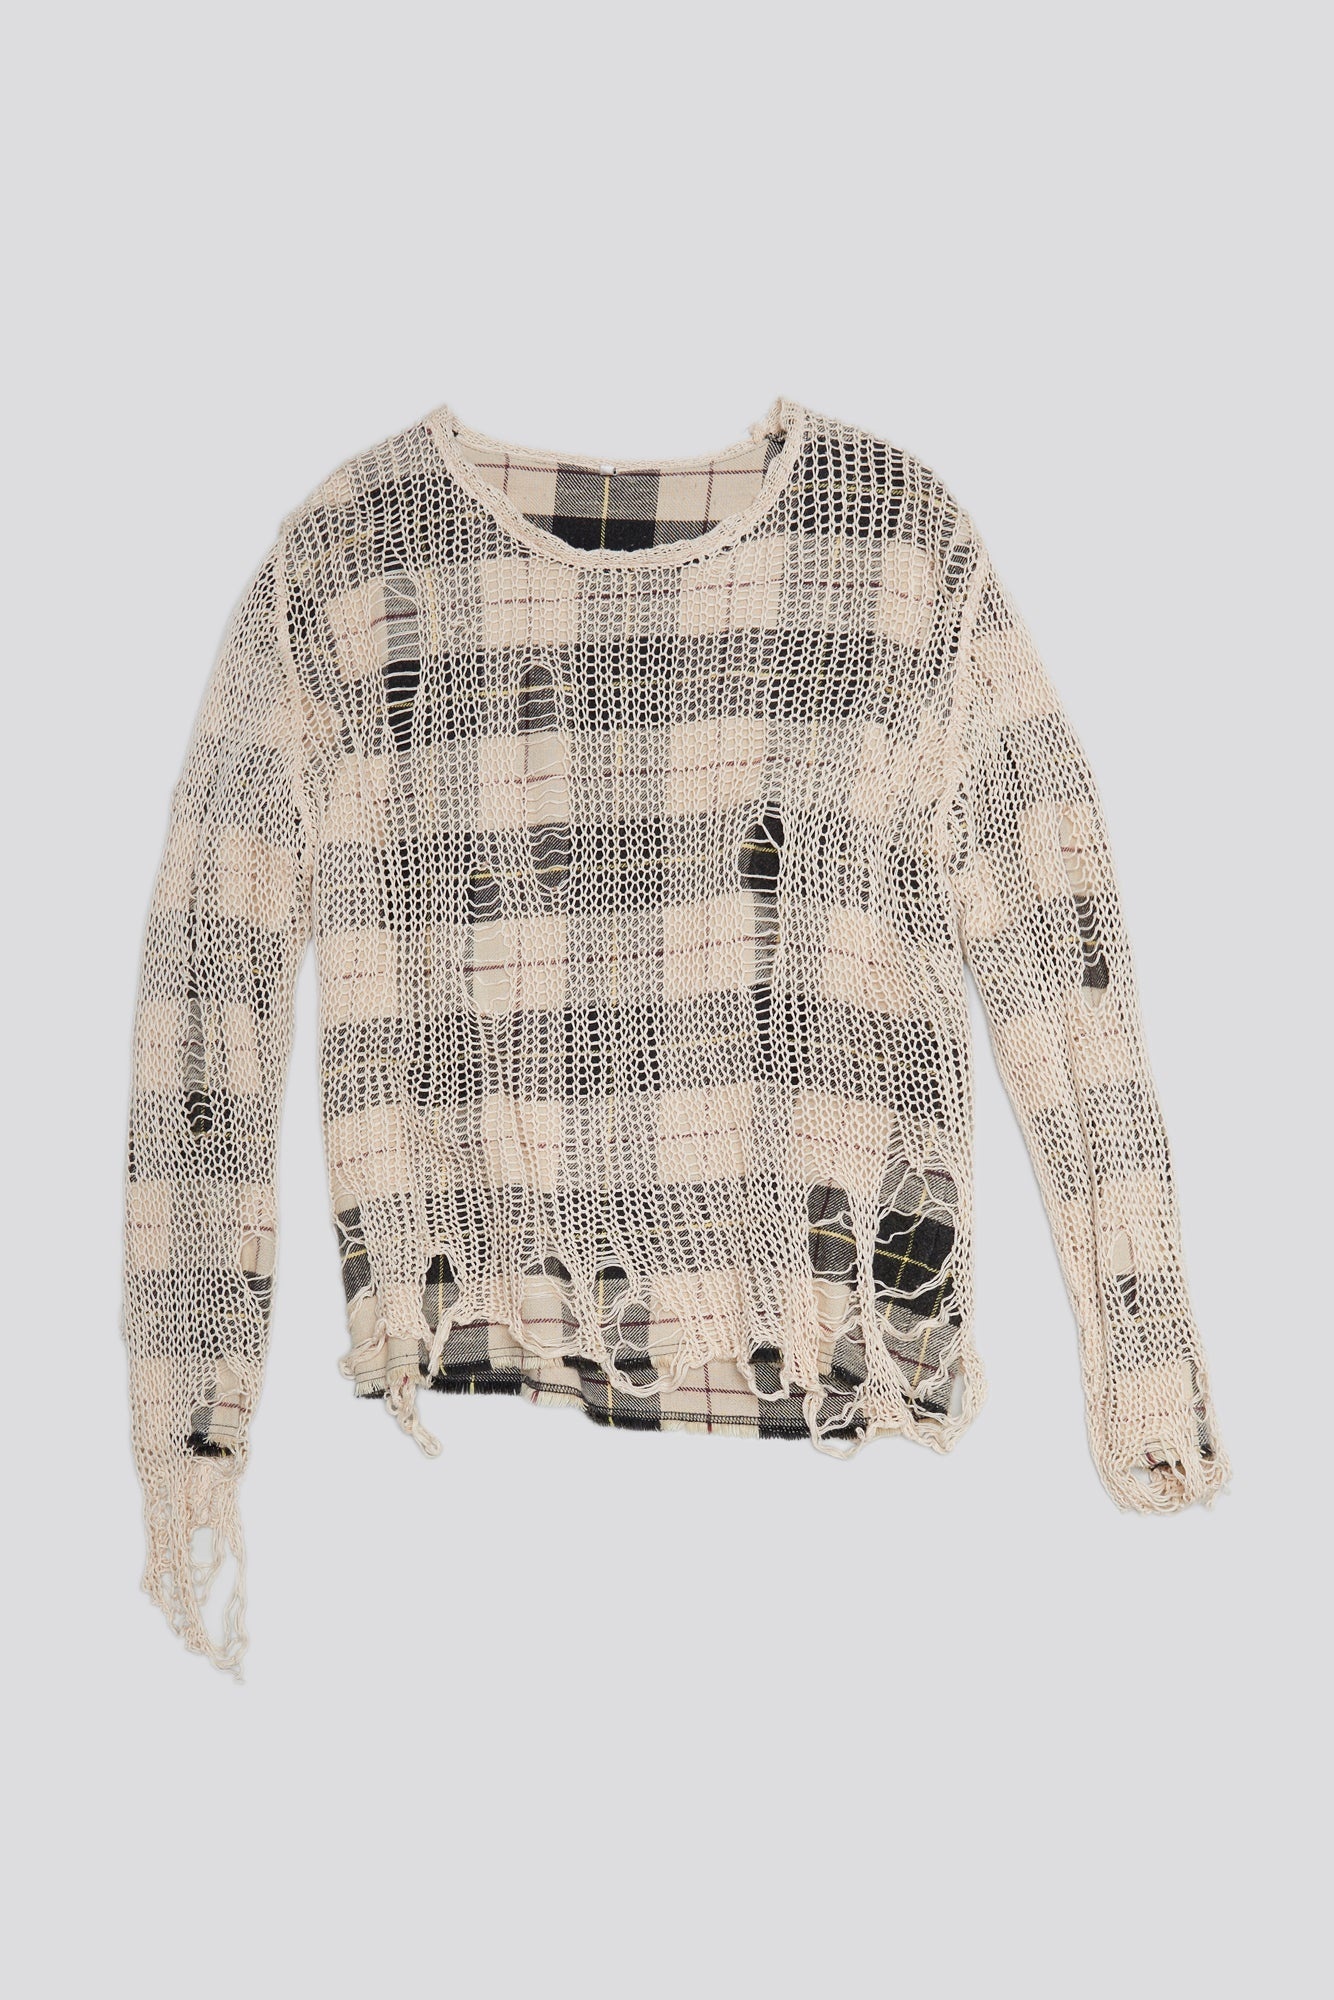 RELAXED OVERLAY CREWNECK - CREAM AND BLACK PLAID - 1